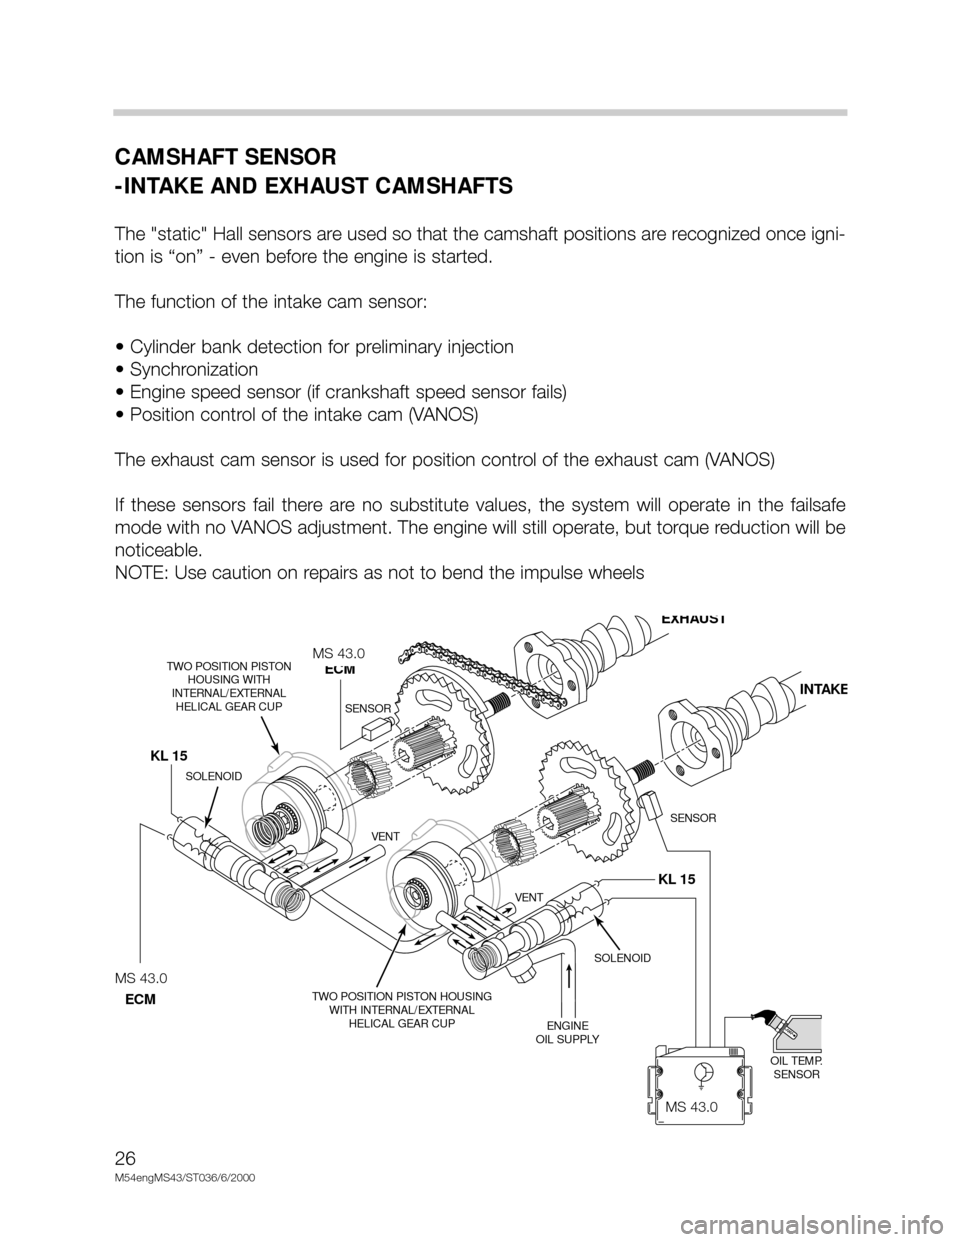 BMW X5 2000 E53 M54 Engine User Guide 26
M54engMS43/ST036/6/2000
CAMSHAFT SENSOR
-INTAKE AND EXHAUST CAMSHAFTS
The "static" Hall sensors are used so that the camshaft positions are recognized once igni-
tion is “on” - even before the 